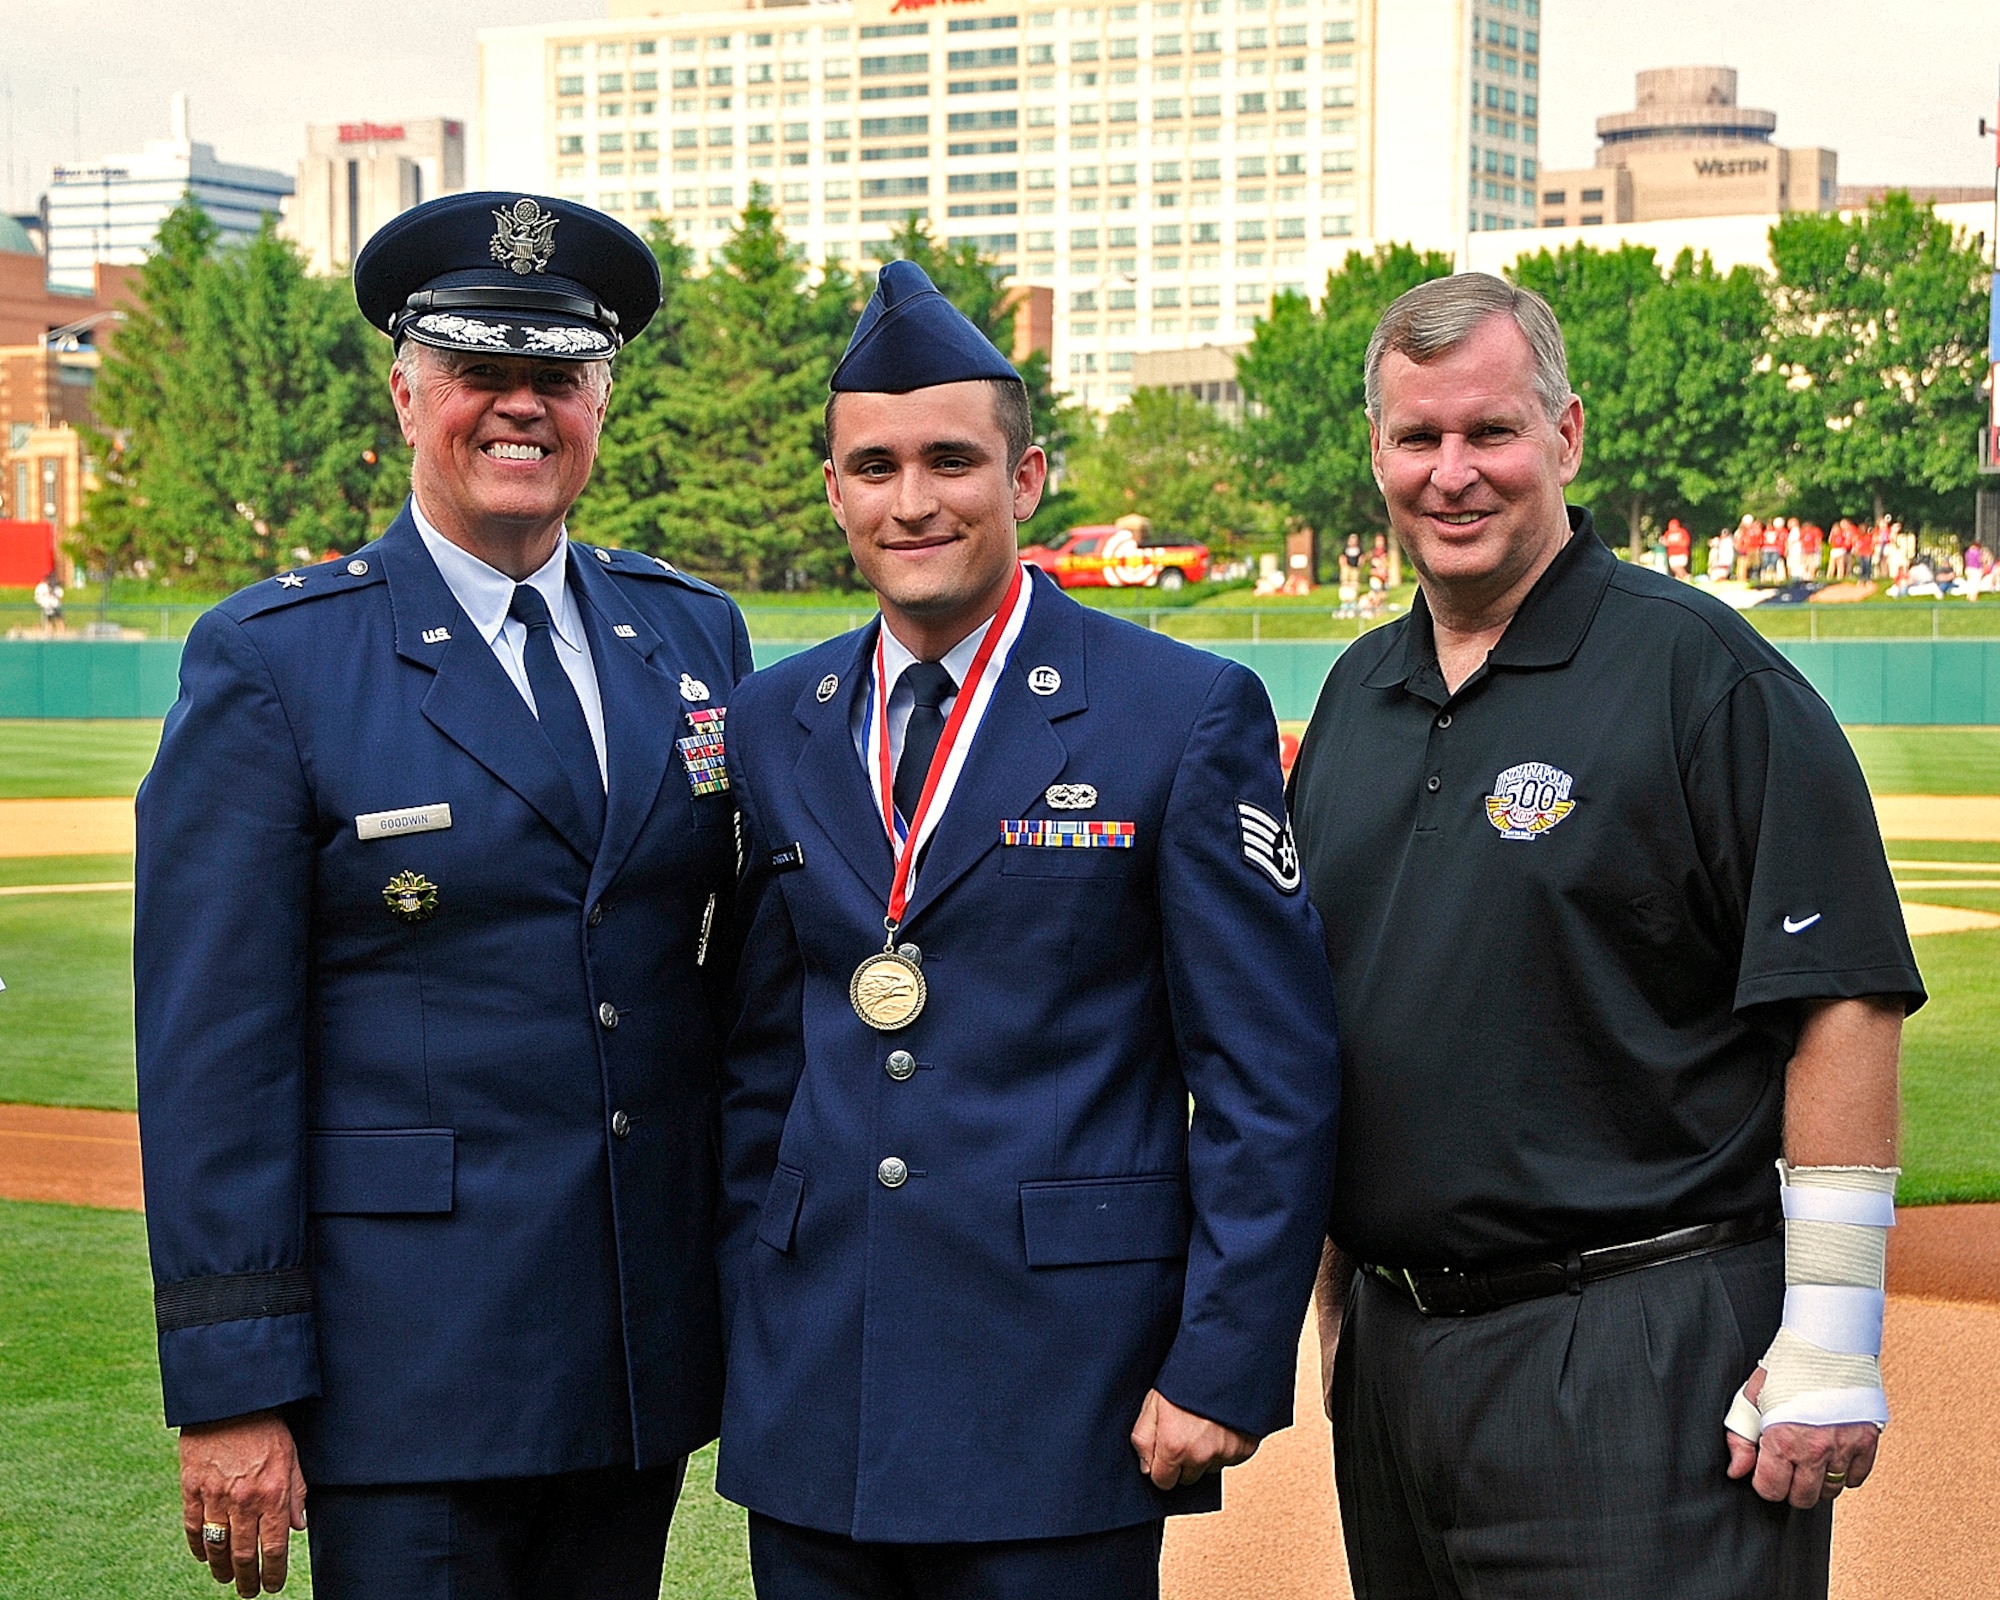 Indiana Air National Guard Staff Sgt. Andrew Carboneau poses with Brigadier General Stewart Goodwin, Assistant Adjutant General - Air, Indiana National Guard, and Mayor Greg Ballard, mayor of Indianapolis, Ind. on Victory Field, home of the Indianapolis Indians, in Indianapolis, Ind. on May 20, 2011.  Carboneau was just awarded Airman of the Year for 2010 for the Indiana Air National Guard and was being presented the award at the Armed Forces Day Picnic.  Photo by Indiana Air National Guard Staff Sgt. Justin Goeden. RELEASED